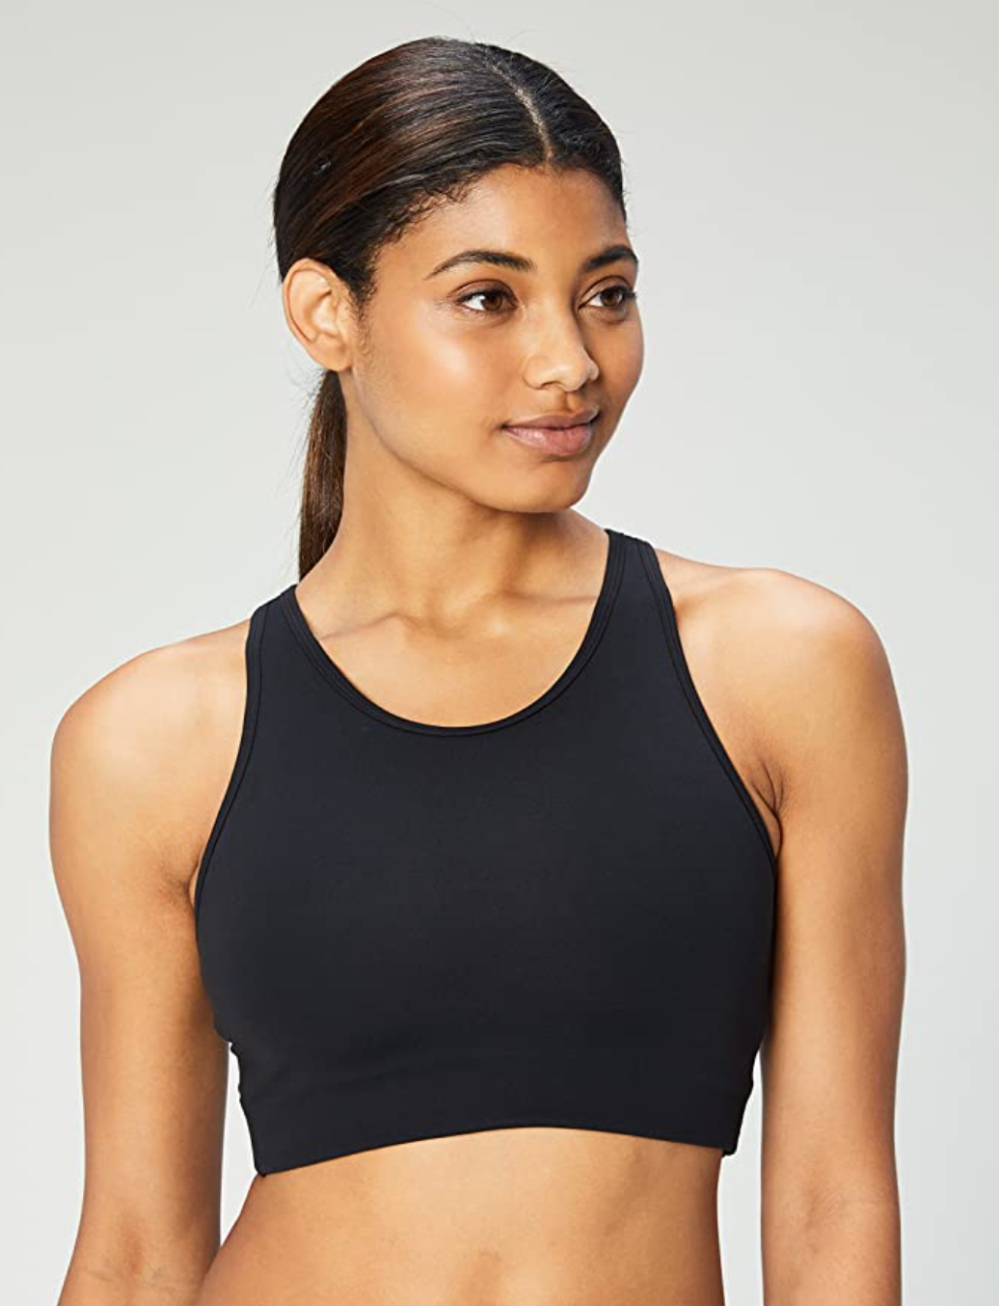 10 stylish sports bras 2021 that will motivate you to workout